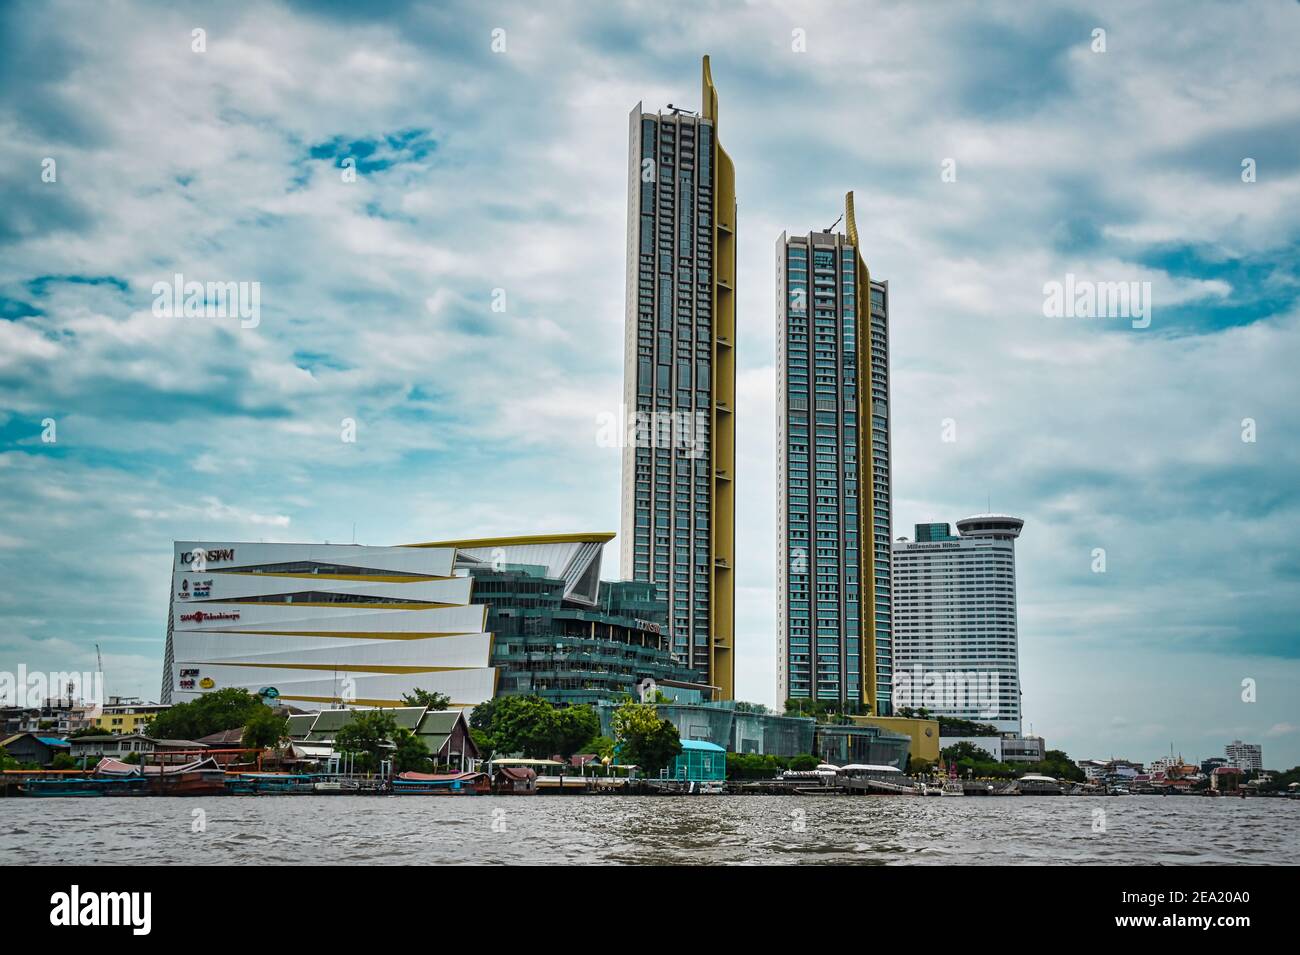 BANGKOK, THAILAND - MAY 4, 2019: LOUIS VUITTON Iconsiam branch. IIconsiam,  is a mixed-use development on the Chao Phraya River Stock Photo - Alamy